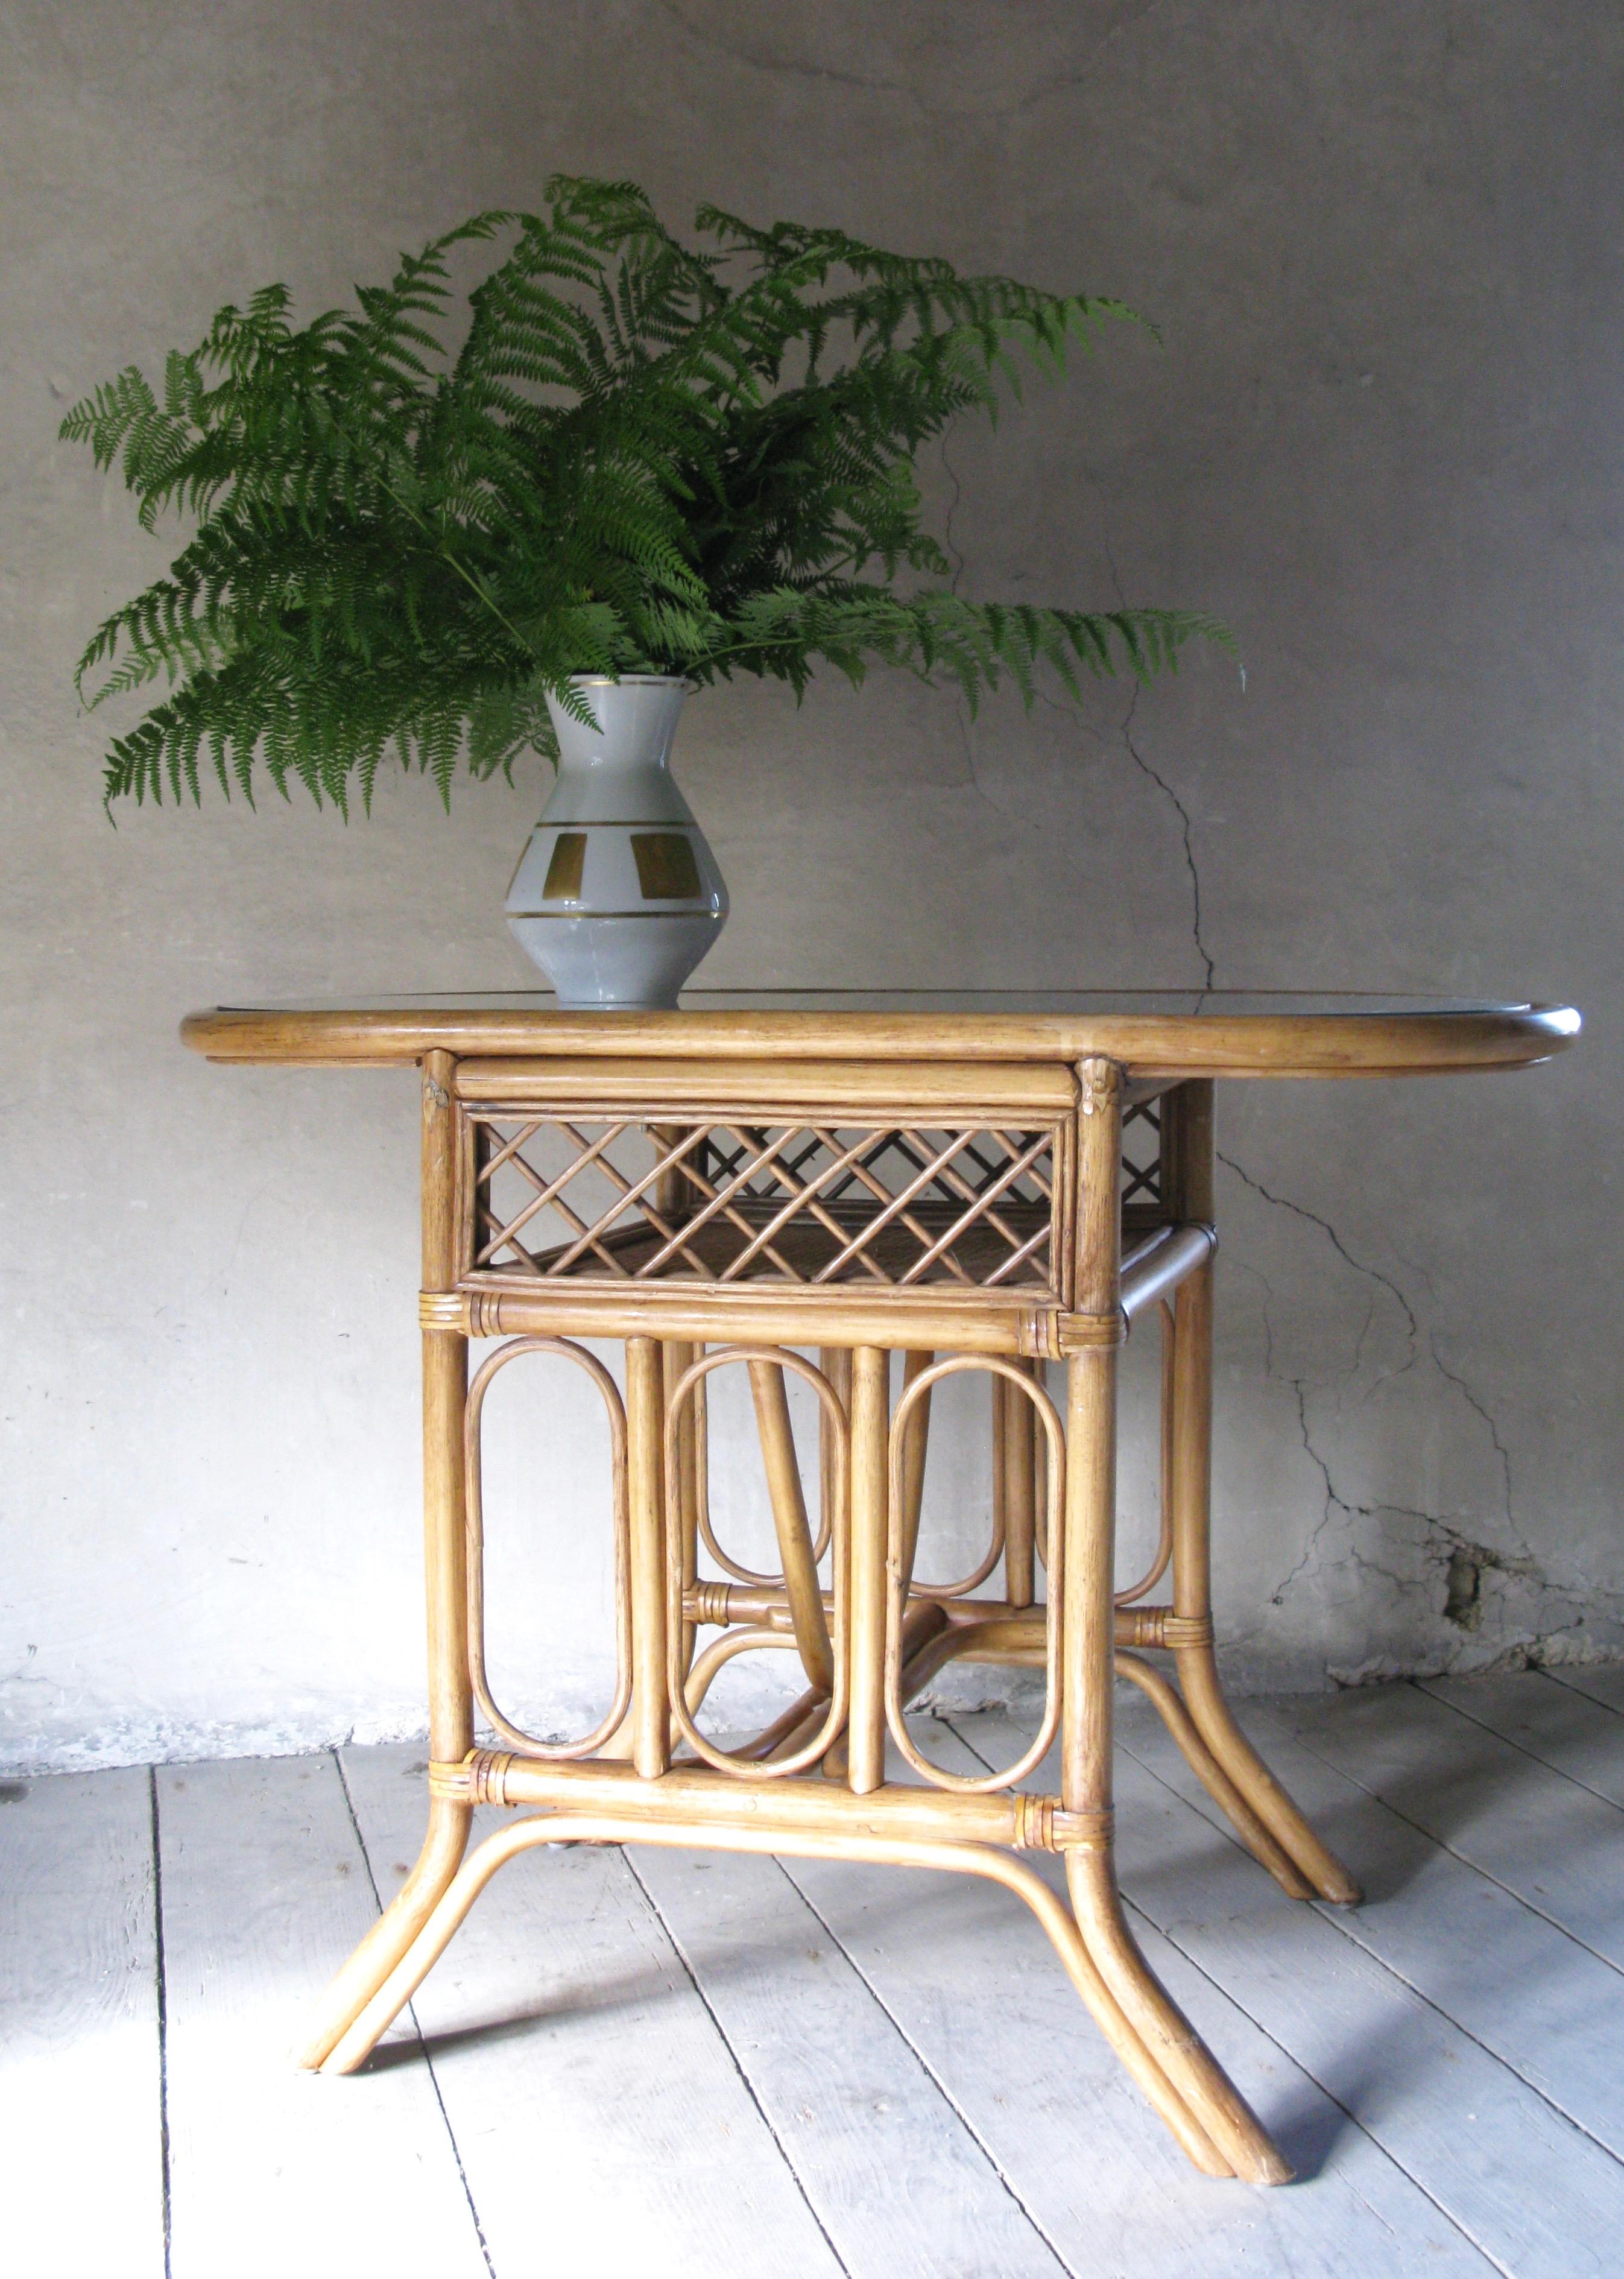 Wonderful decorative midcentury oval bamboo table with glass top.

The item was produced during the 1970s, bought in France

An elegant and lovable design.